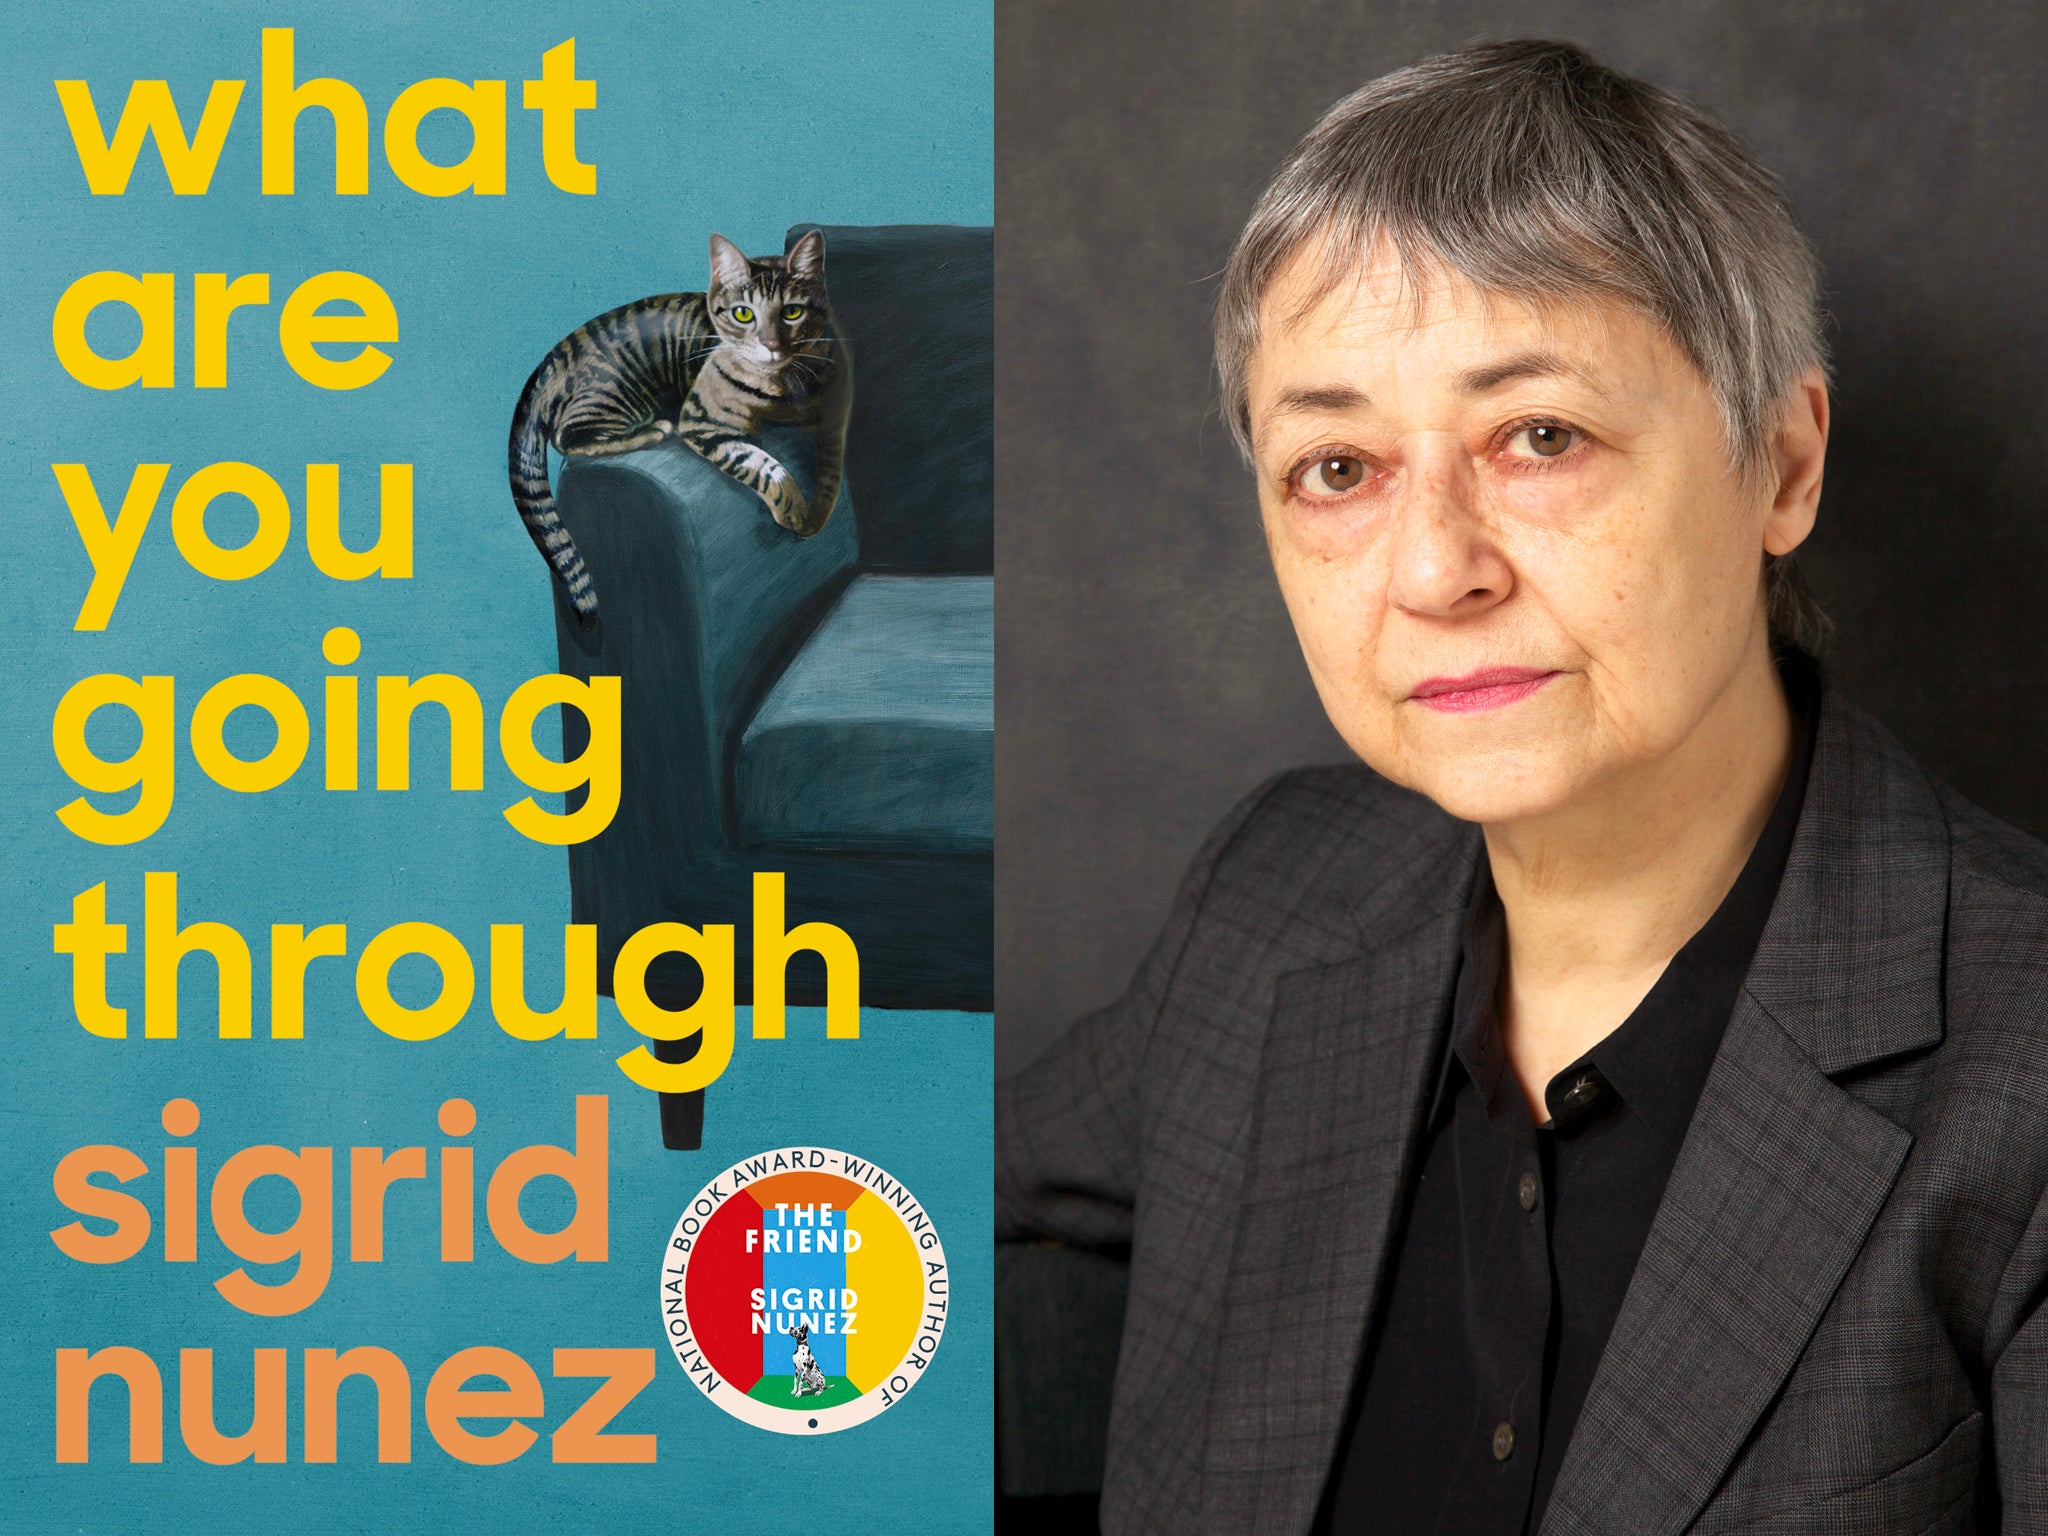 Sigrid Nunez’蝉 ‘What Are You Going Through’ is a story of a terminally ill woman who has opted to euthanise herself, and the friend who supports her through it